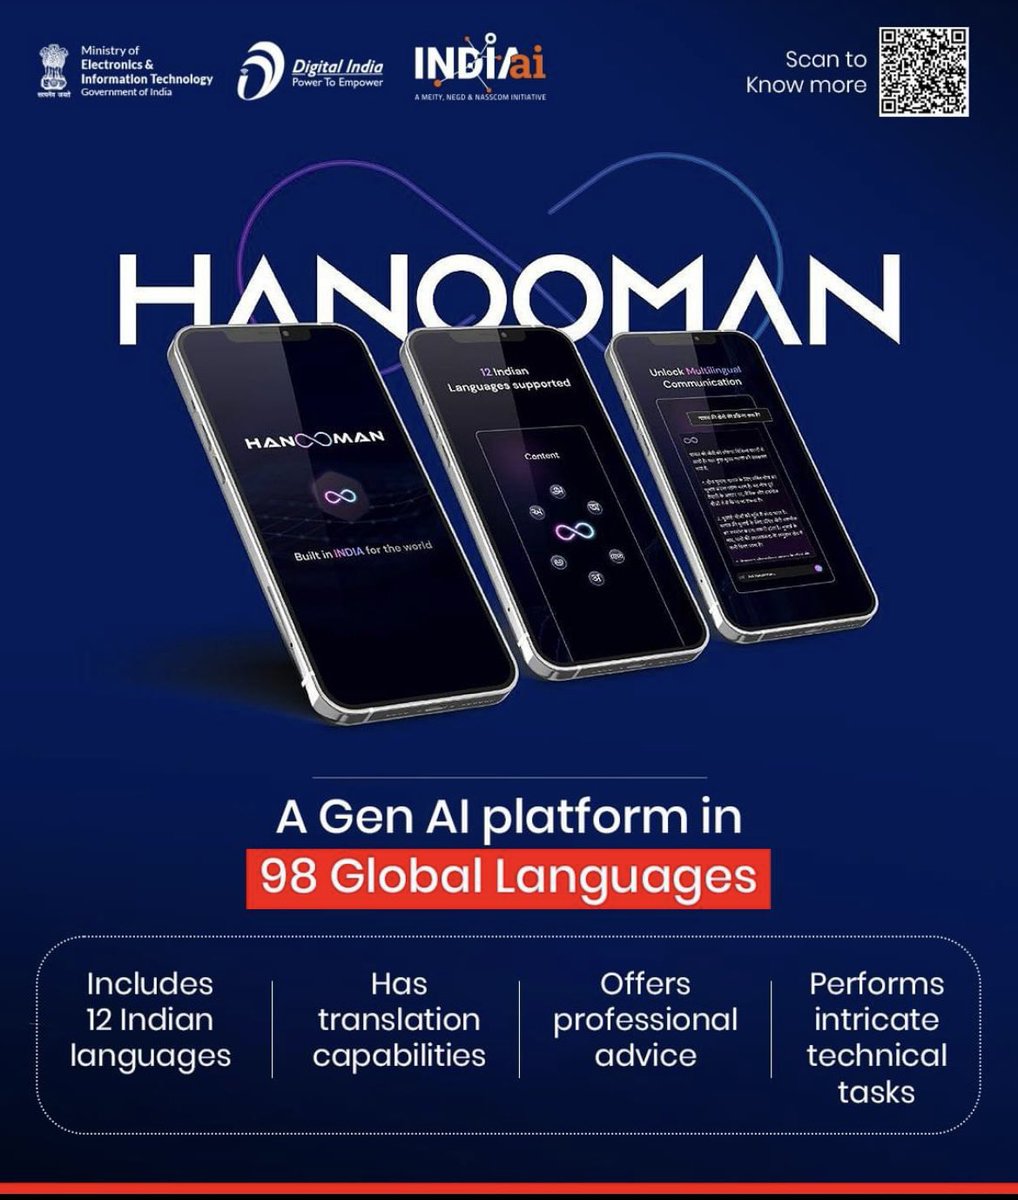 .@Hanooman_ai goes global: India's GenAI platform speaks 98 languages worldwide Hanooman ai , India's Gen AI platform, launched in 98 languages. @Android users can access the fully functional multilingual web platform and app, while an iOs release is forthcoming. Via